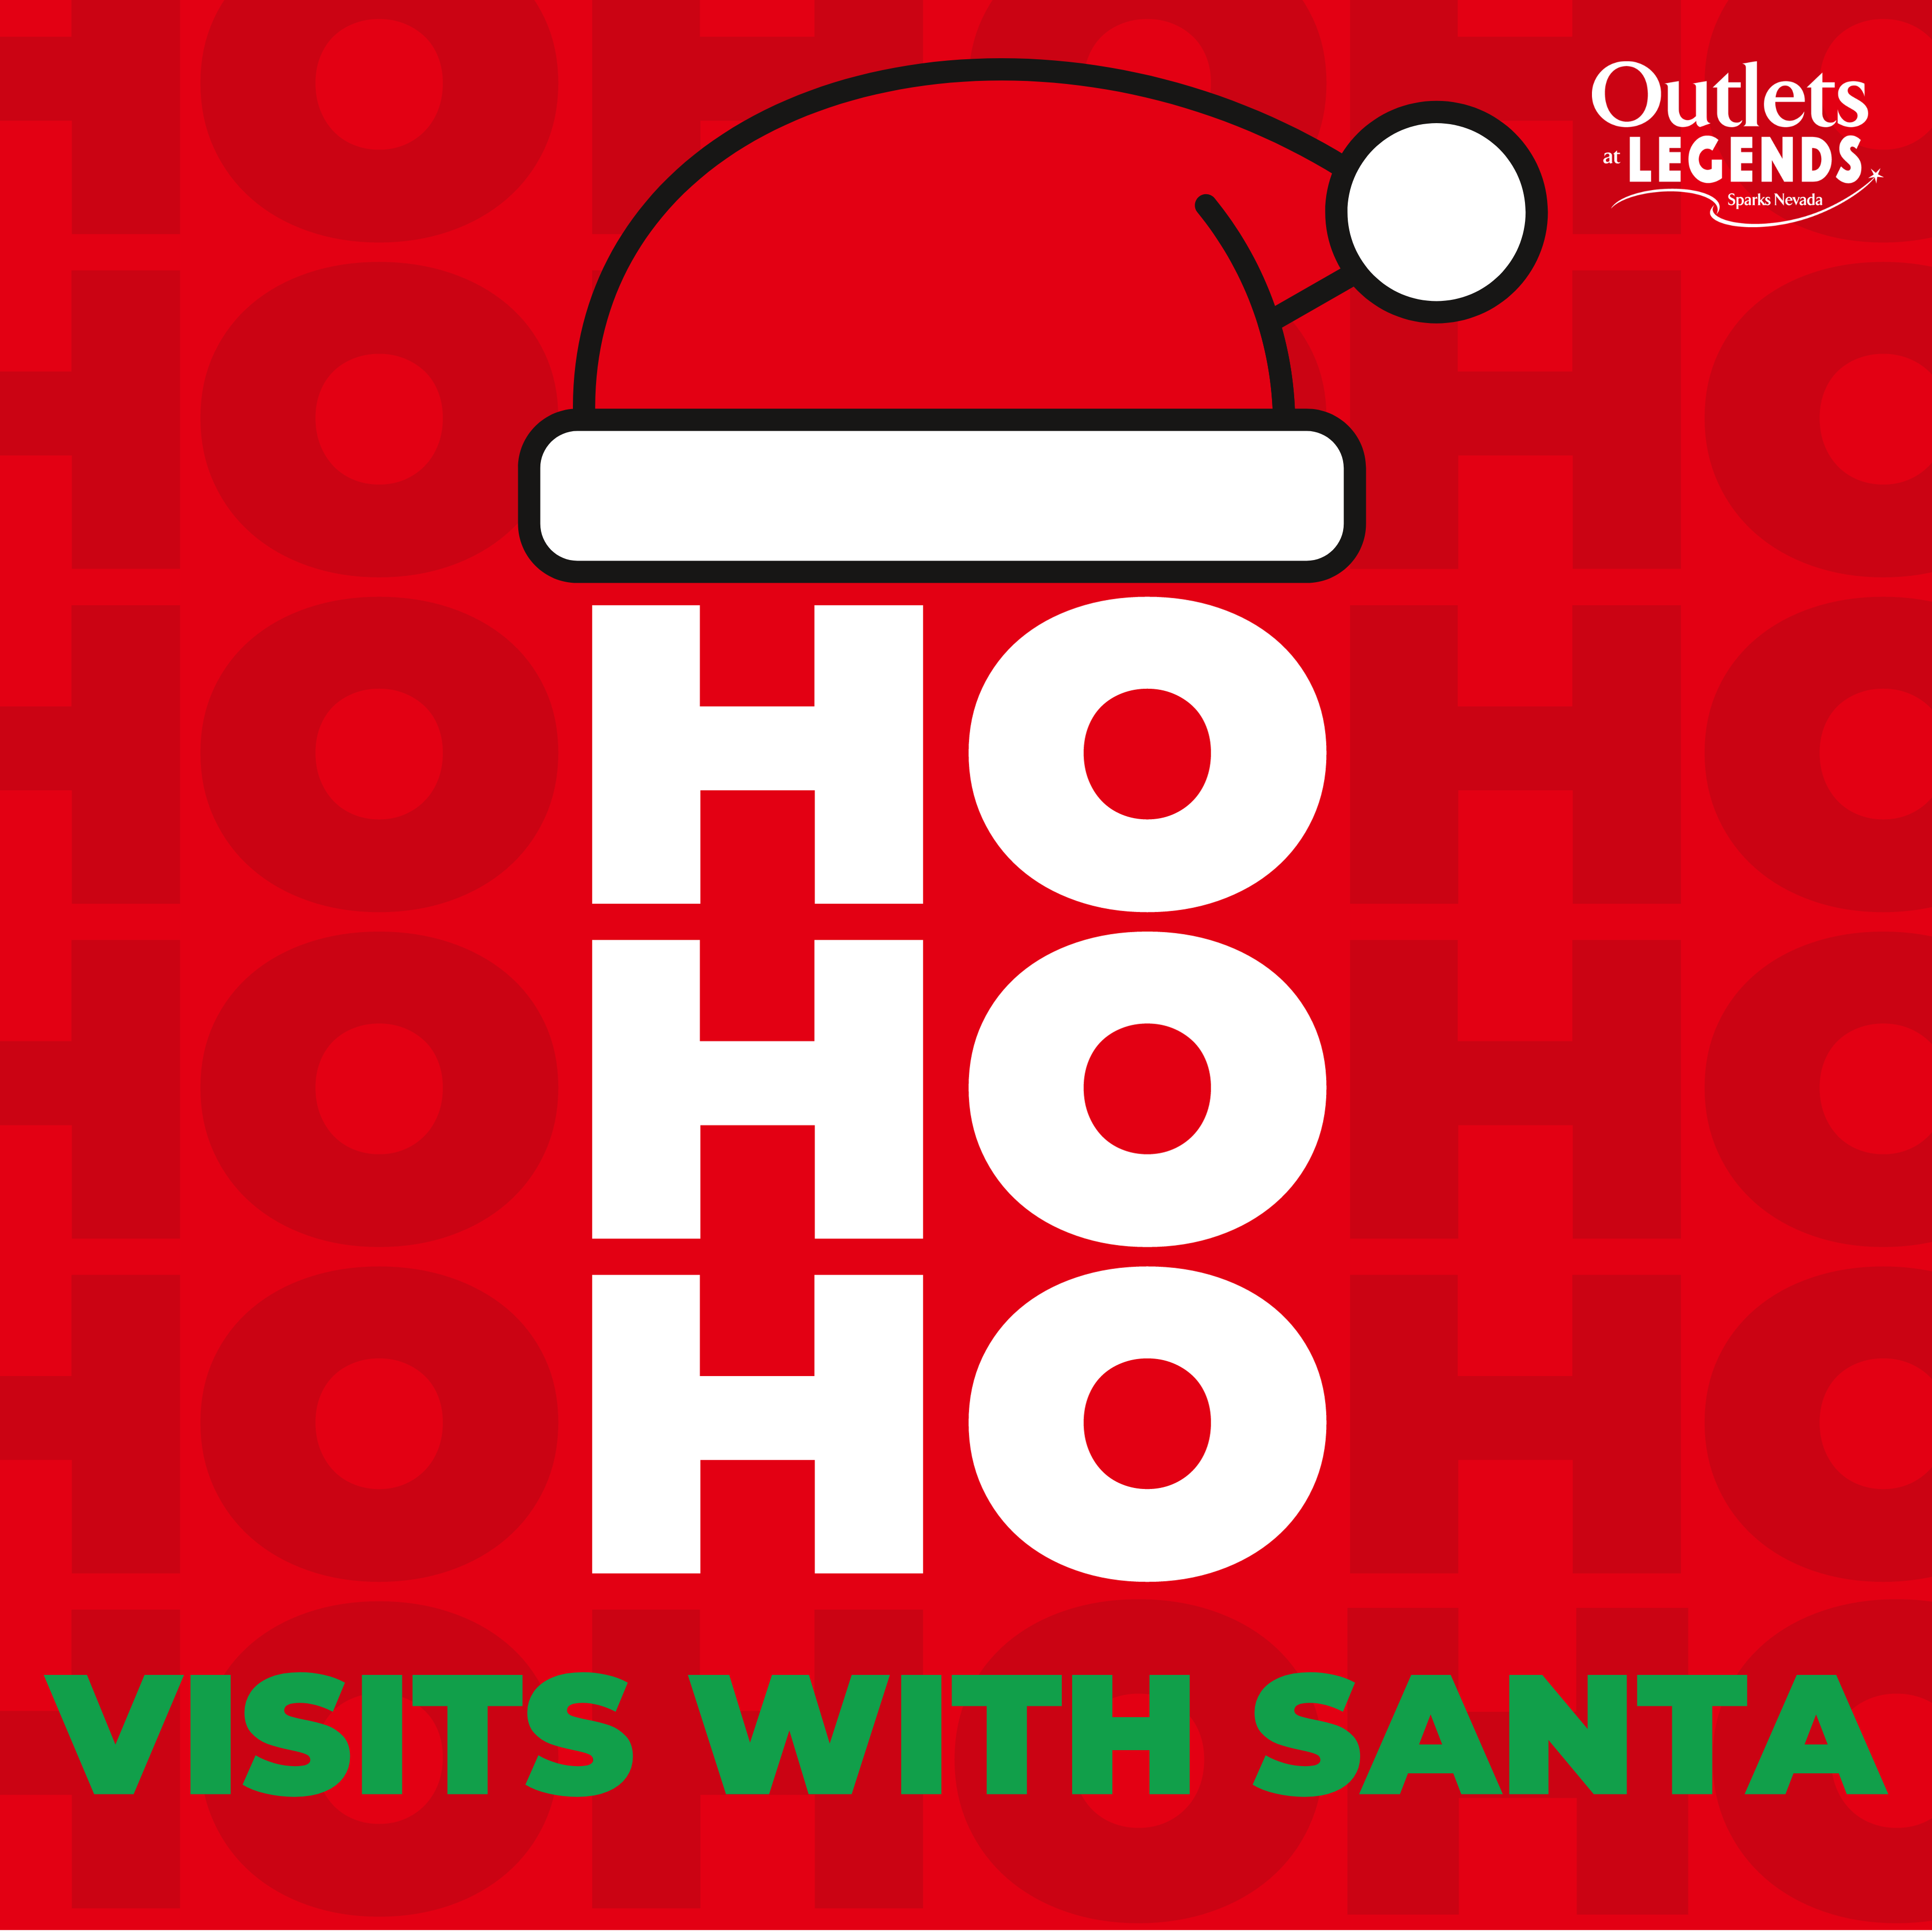 Visits with Santa November 25th Things to do at The Outlets at Legends